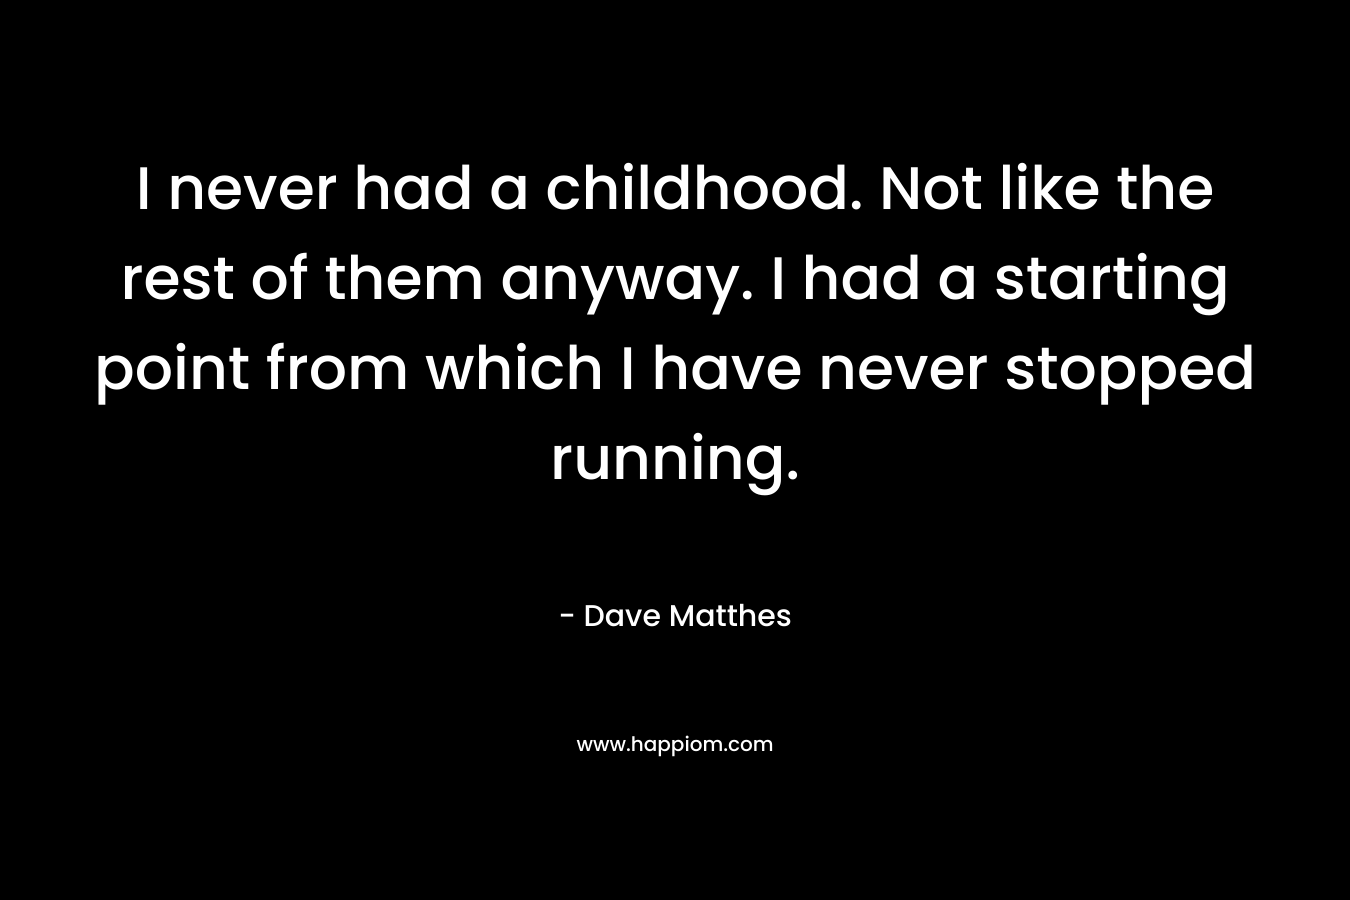 I never had a childhood. Not like the rest of them anyway. I had a starting point from which I have never stopped running. – Dave Matthes